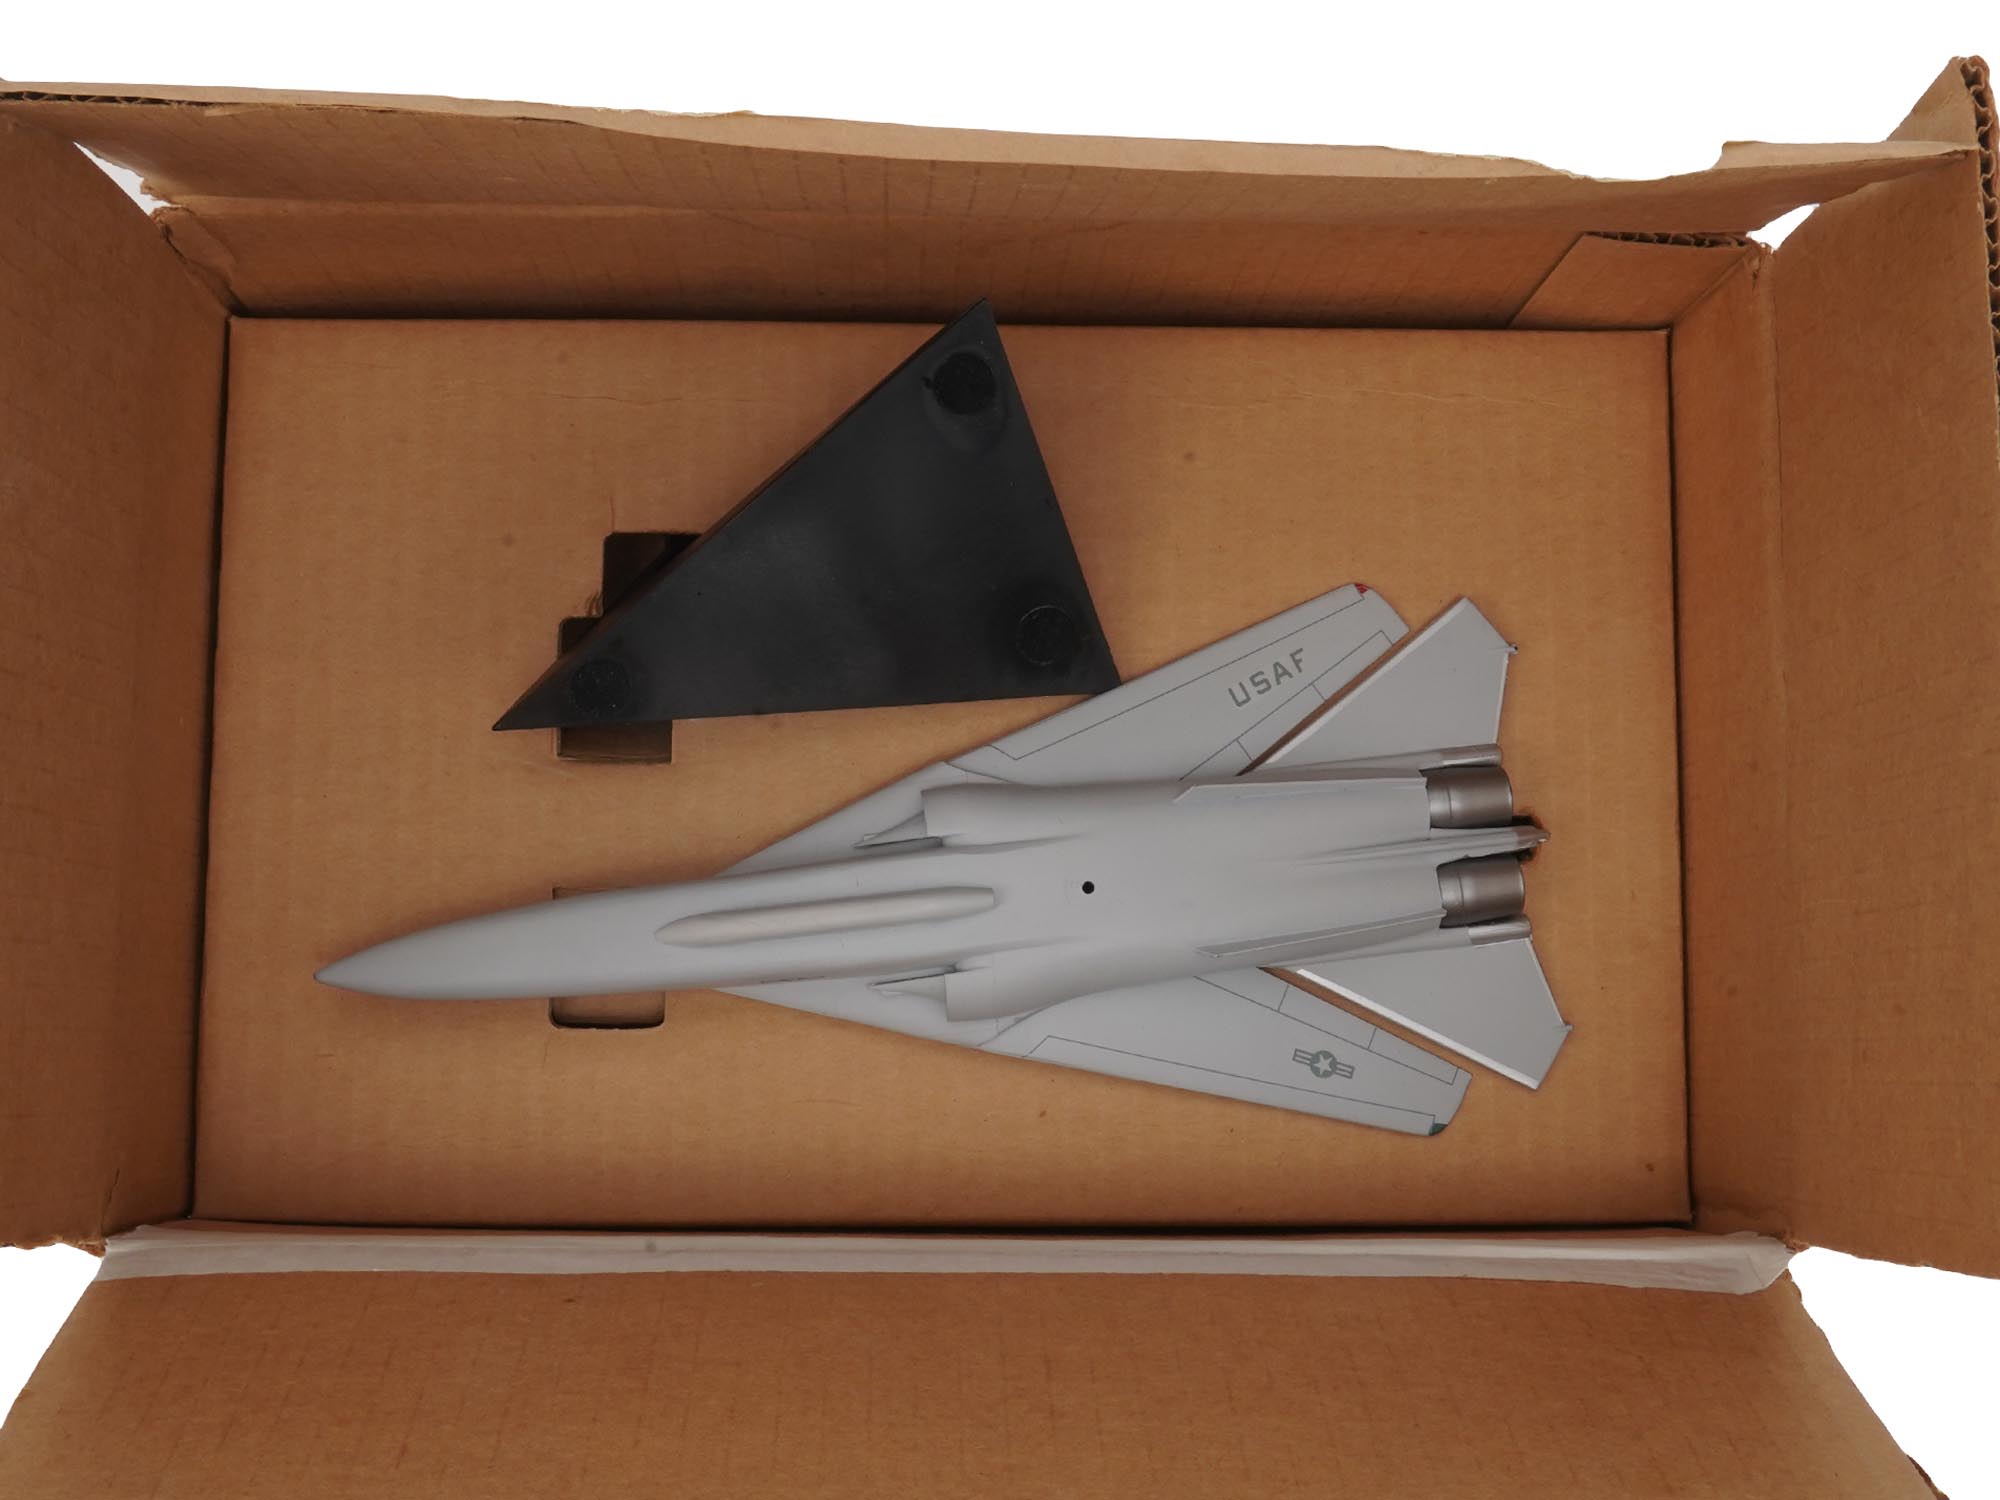 USAF EF-111A RAVEN PRECISE AIRPLANE MODEL IN BOX PIC-2